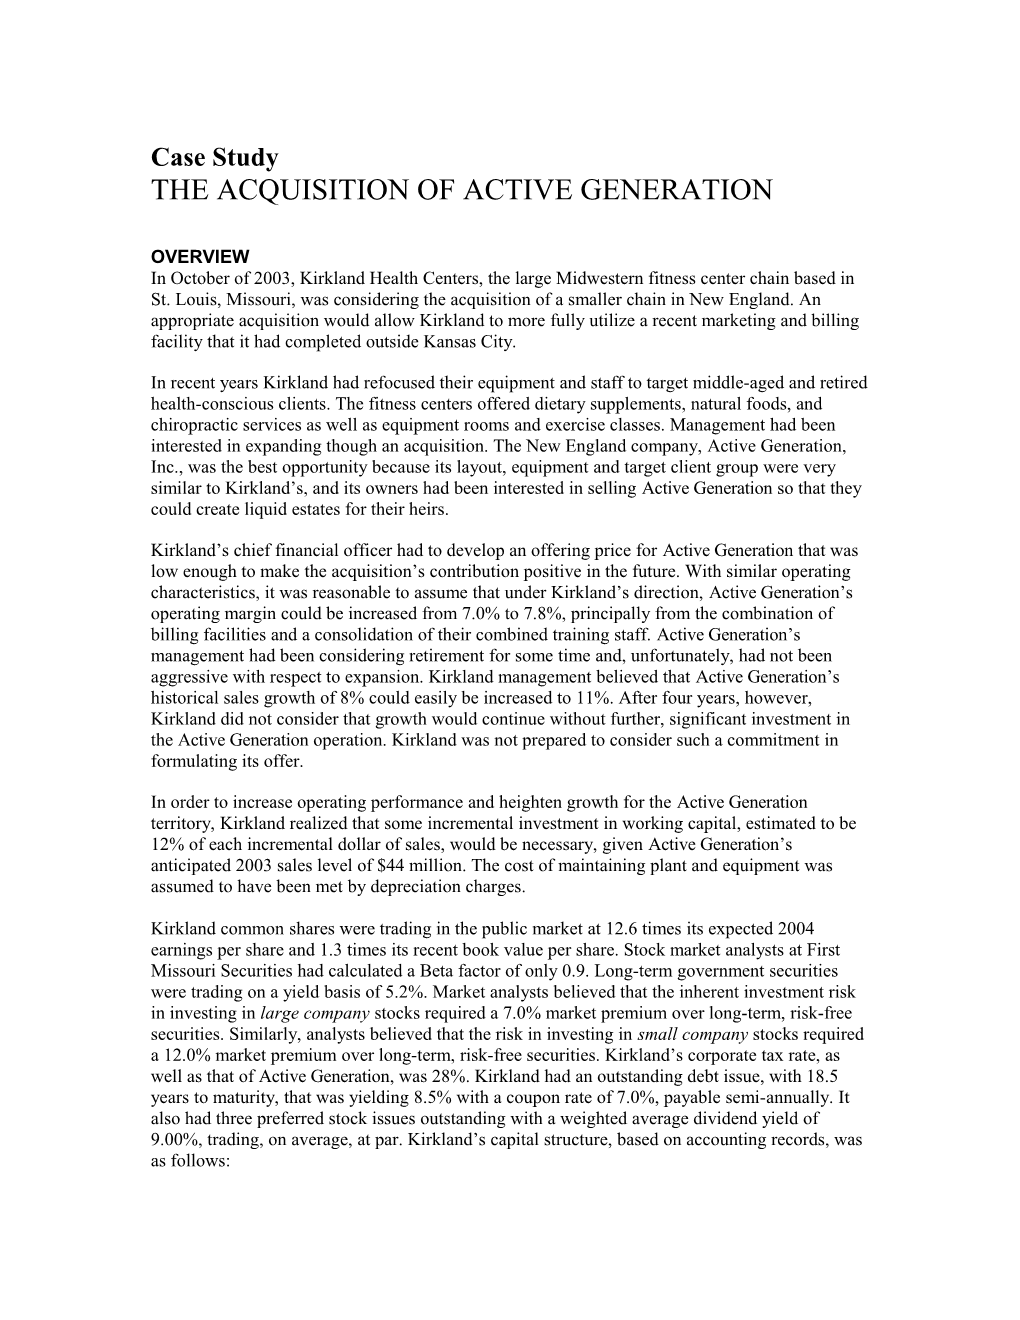 THE Acquisition of ACTIVE GENERATION